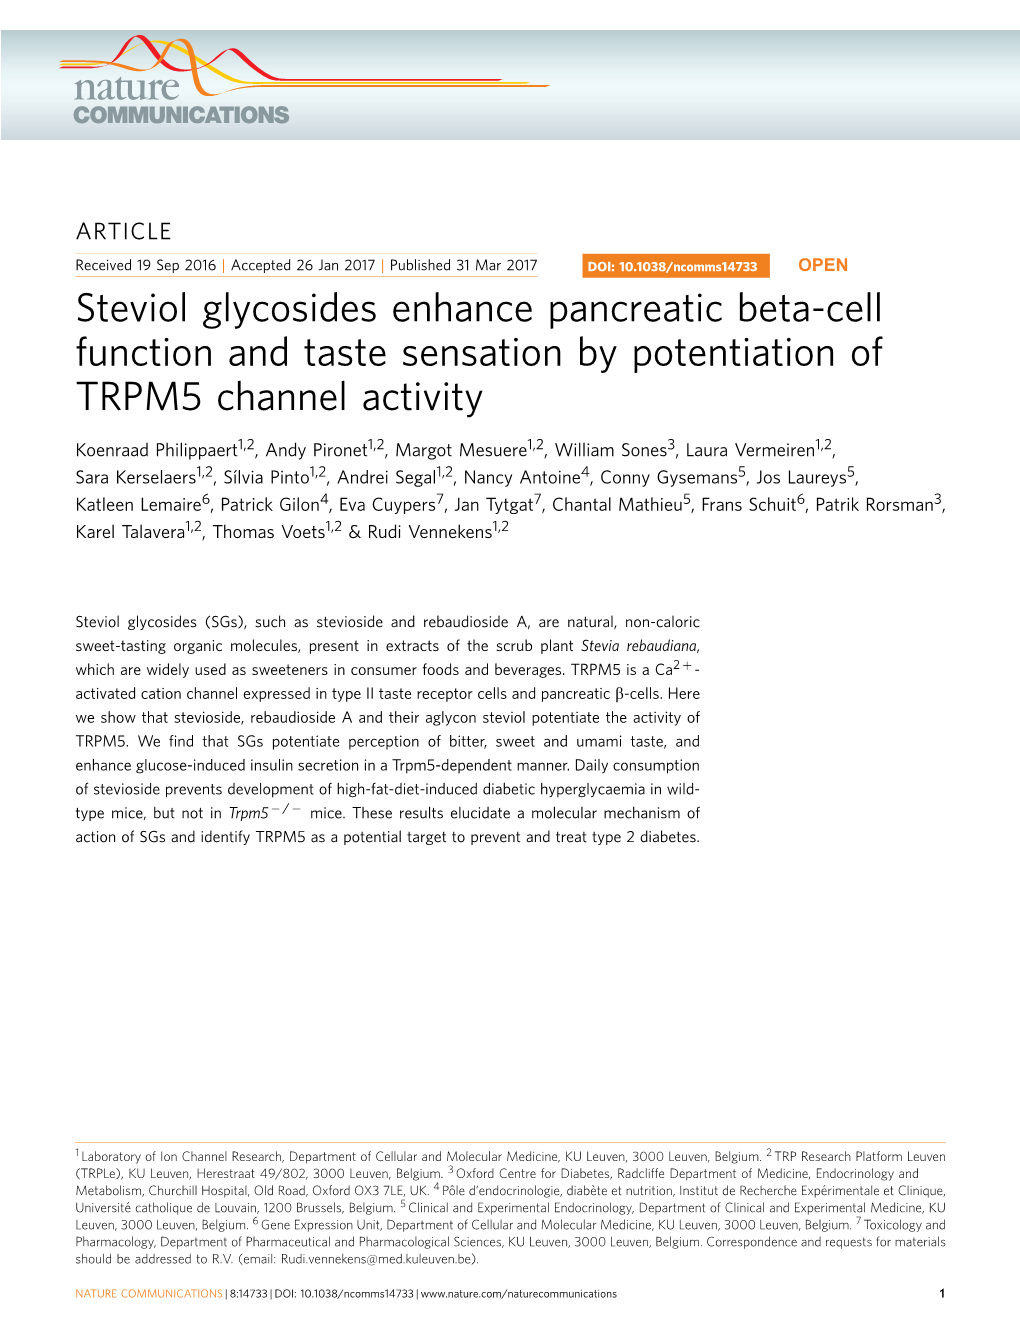 Steviol Glycosides Enhance Pancreatic Beta-Cell Function and Taste Sensation by Potentiation of TRPM5 Channel Activity